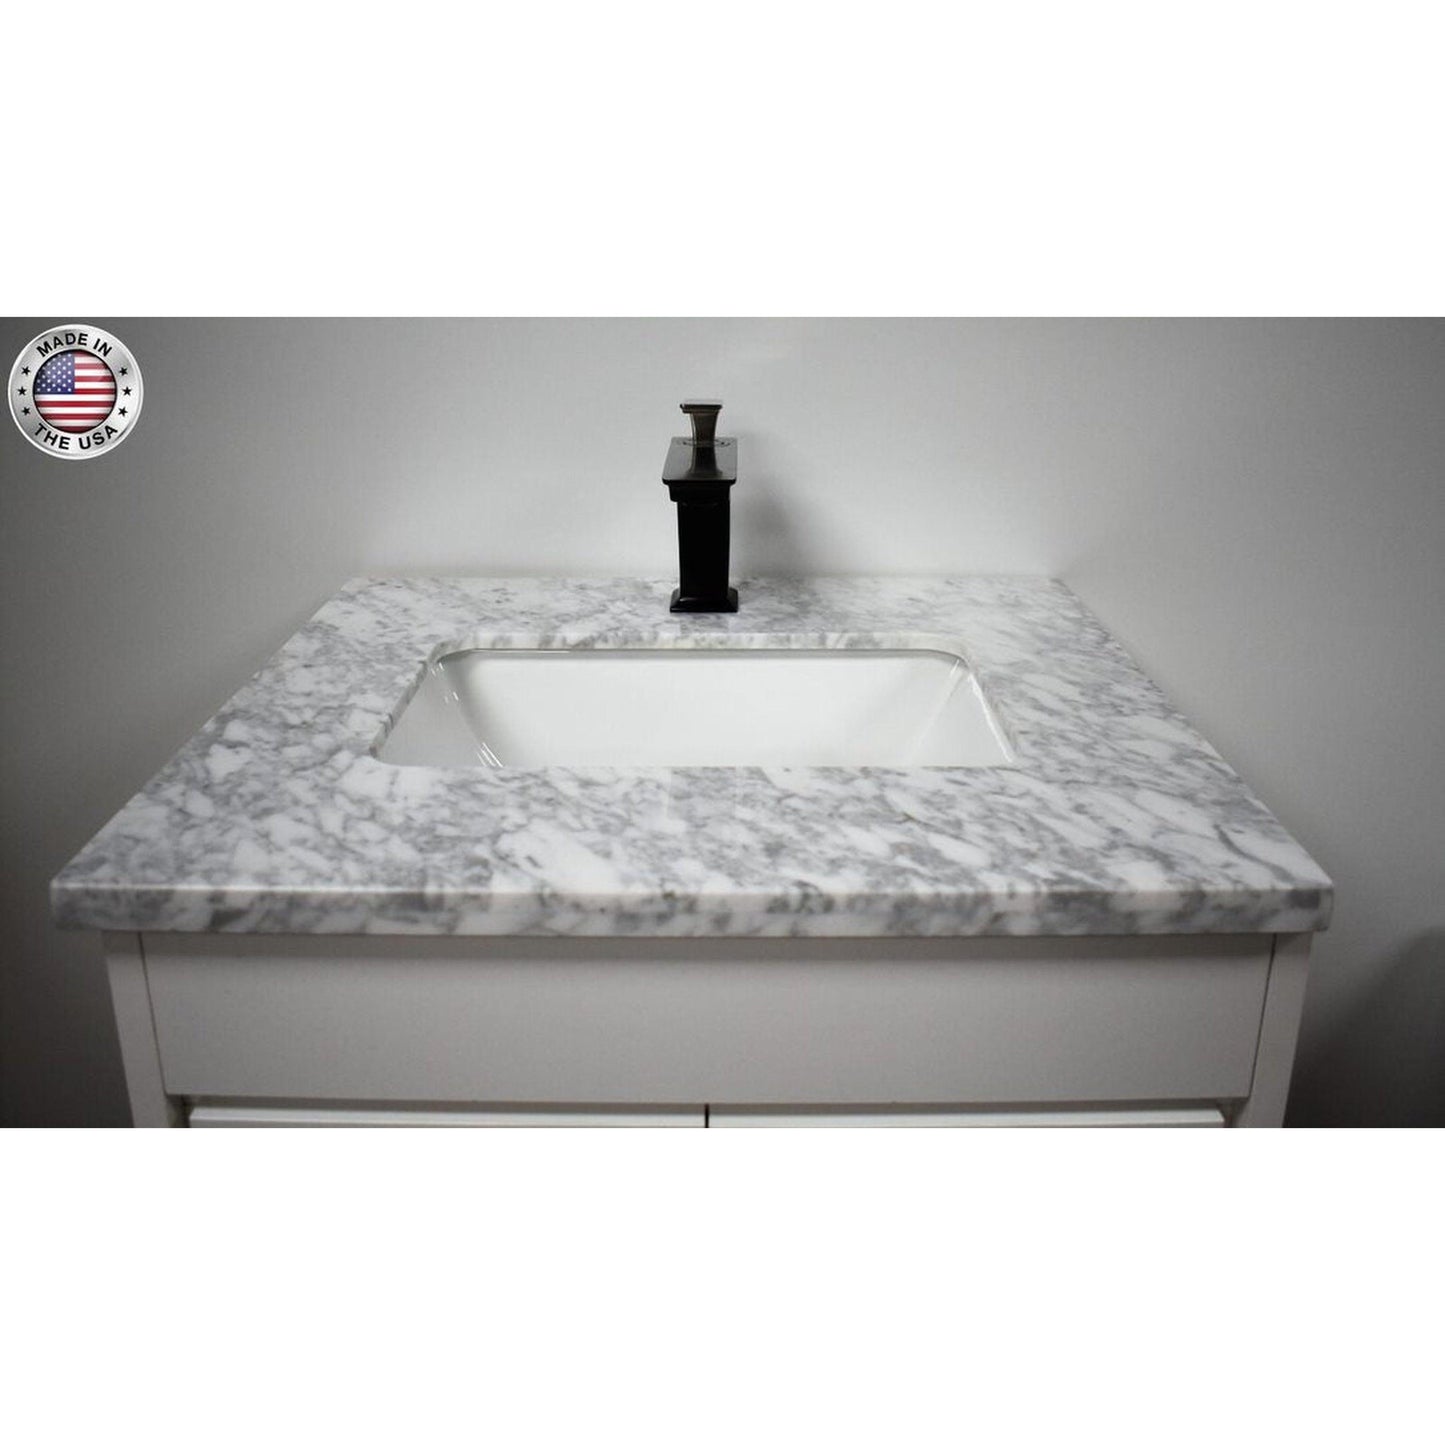 Volpa USA Capri 24" x 22" White Freestanding Modern Bathroom Vanity With Preinstalled Undermount Sink And Carrara Marble top With Brushed Nickel Edge Handles